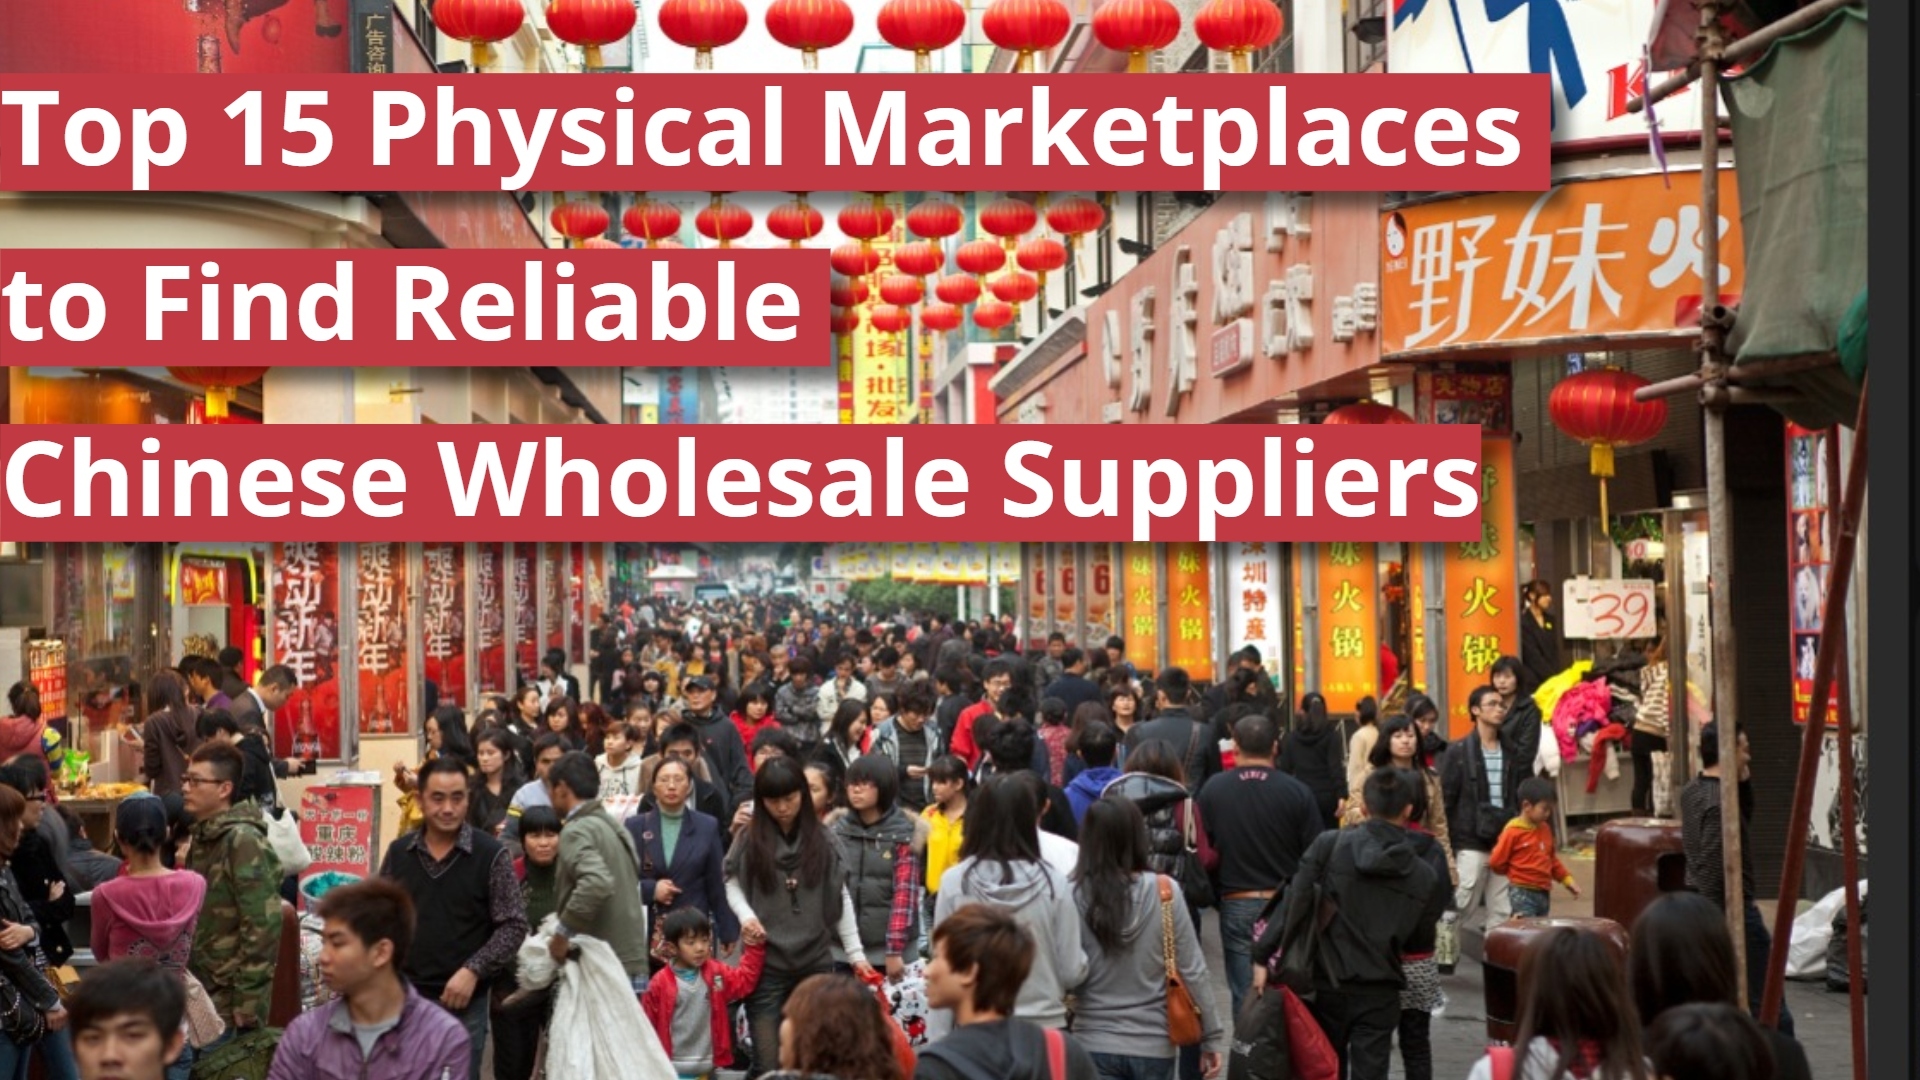 Top 15 Physical Marketplaces to Find Reliable Chinese Wholesale Suppliers